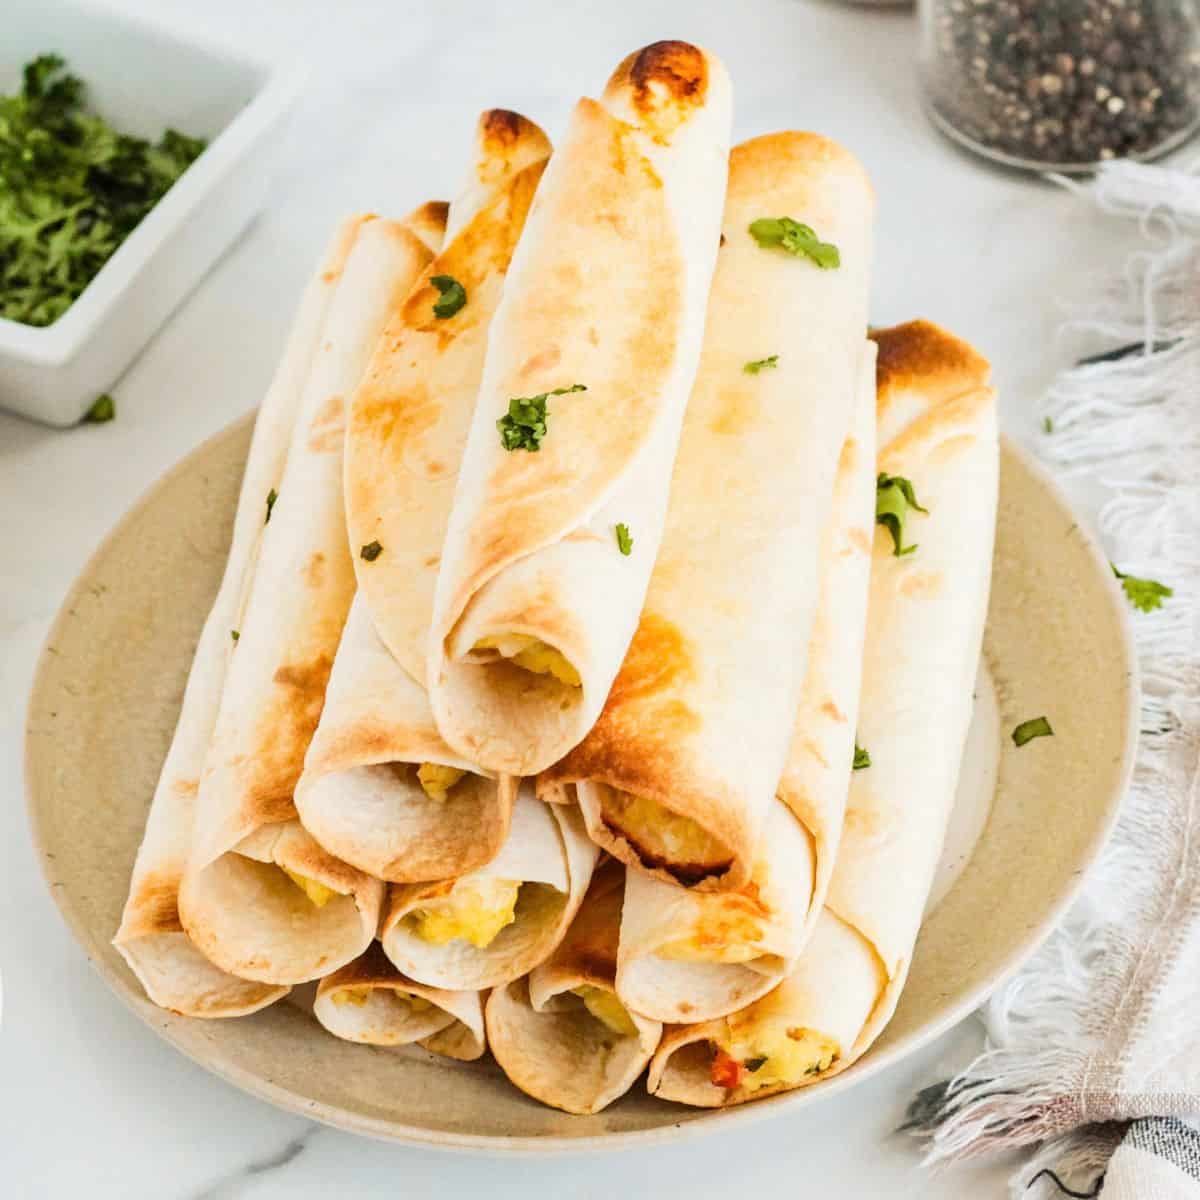 A plate with a stack of breakfast taquitos.